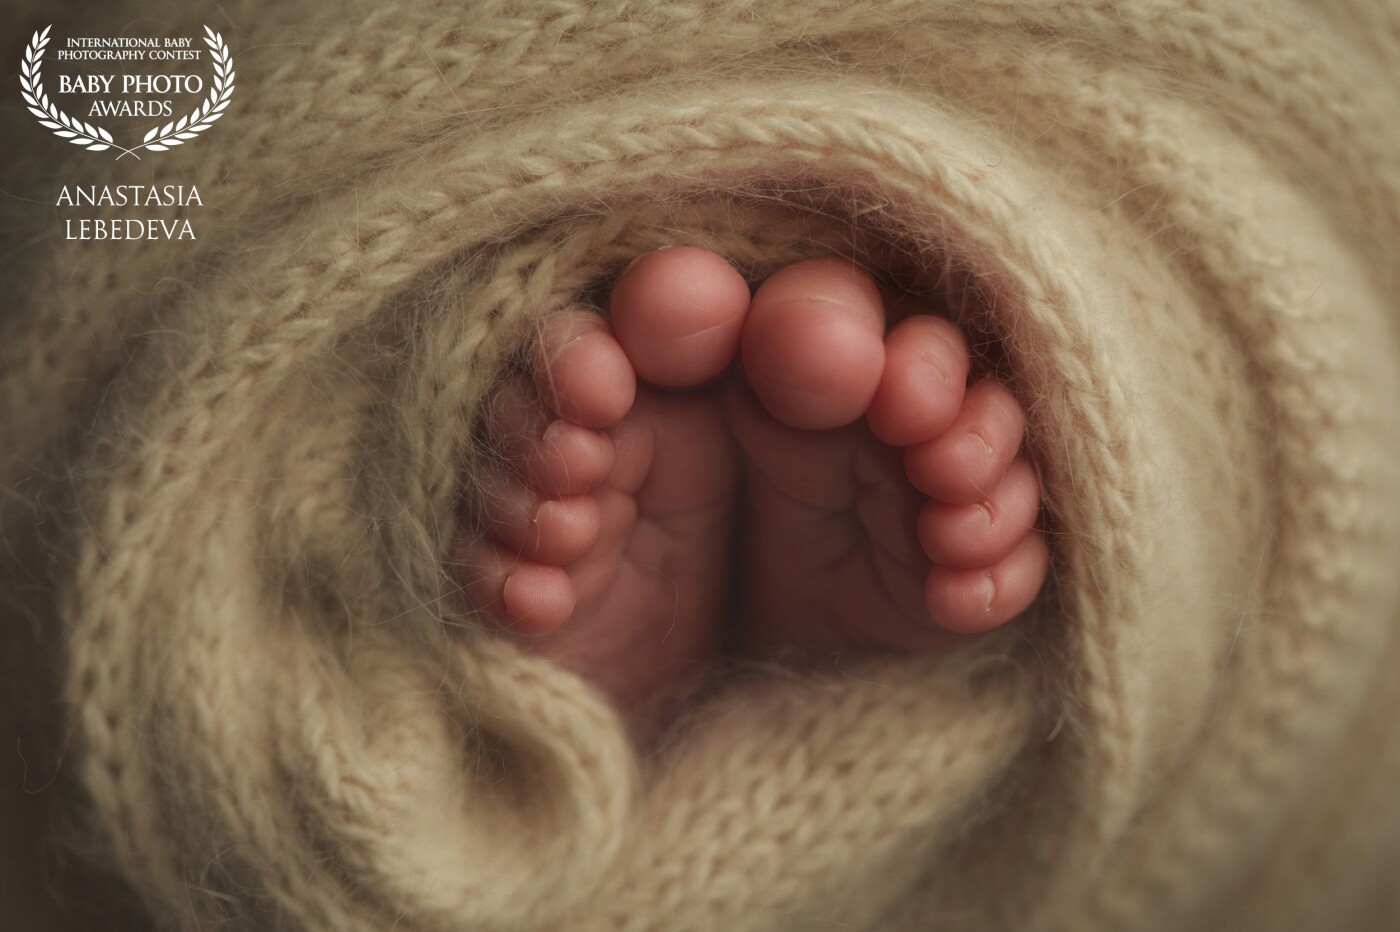 Little sweet fingers of a newborn baby. Parents of newborn babies always ask me to make this particular shot. It is very cute and gentle.